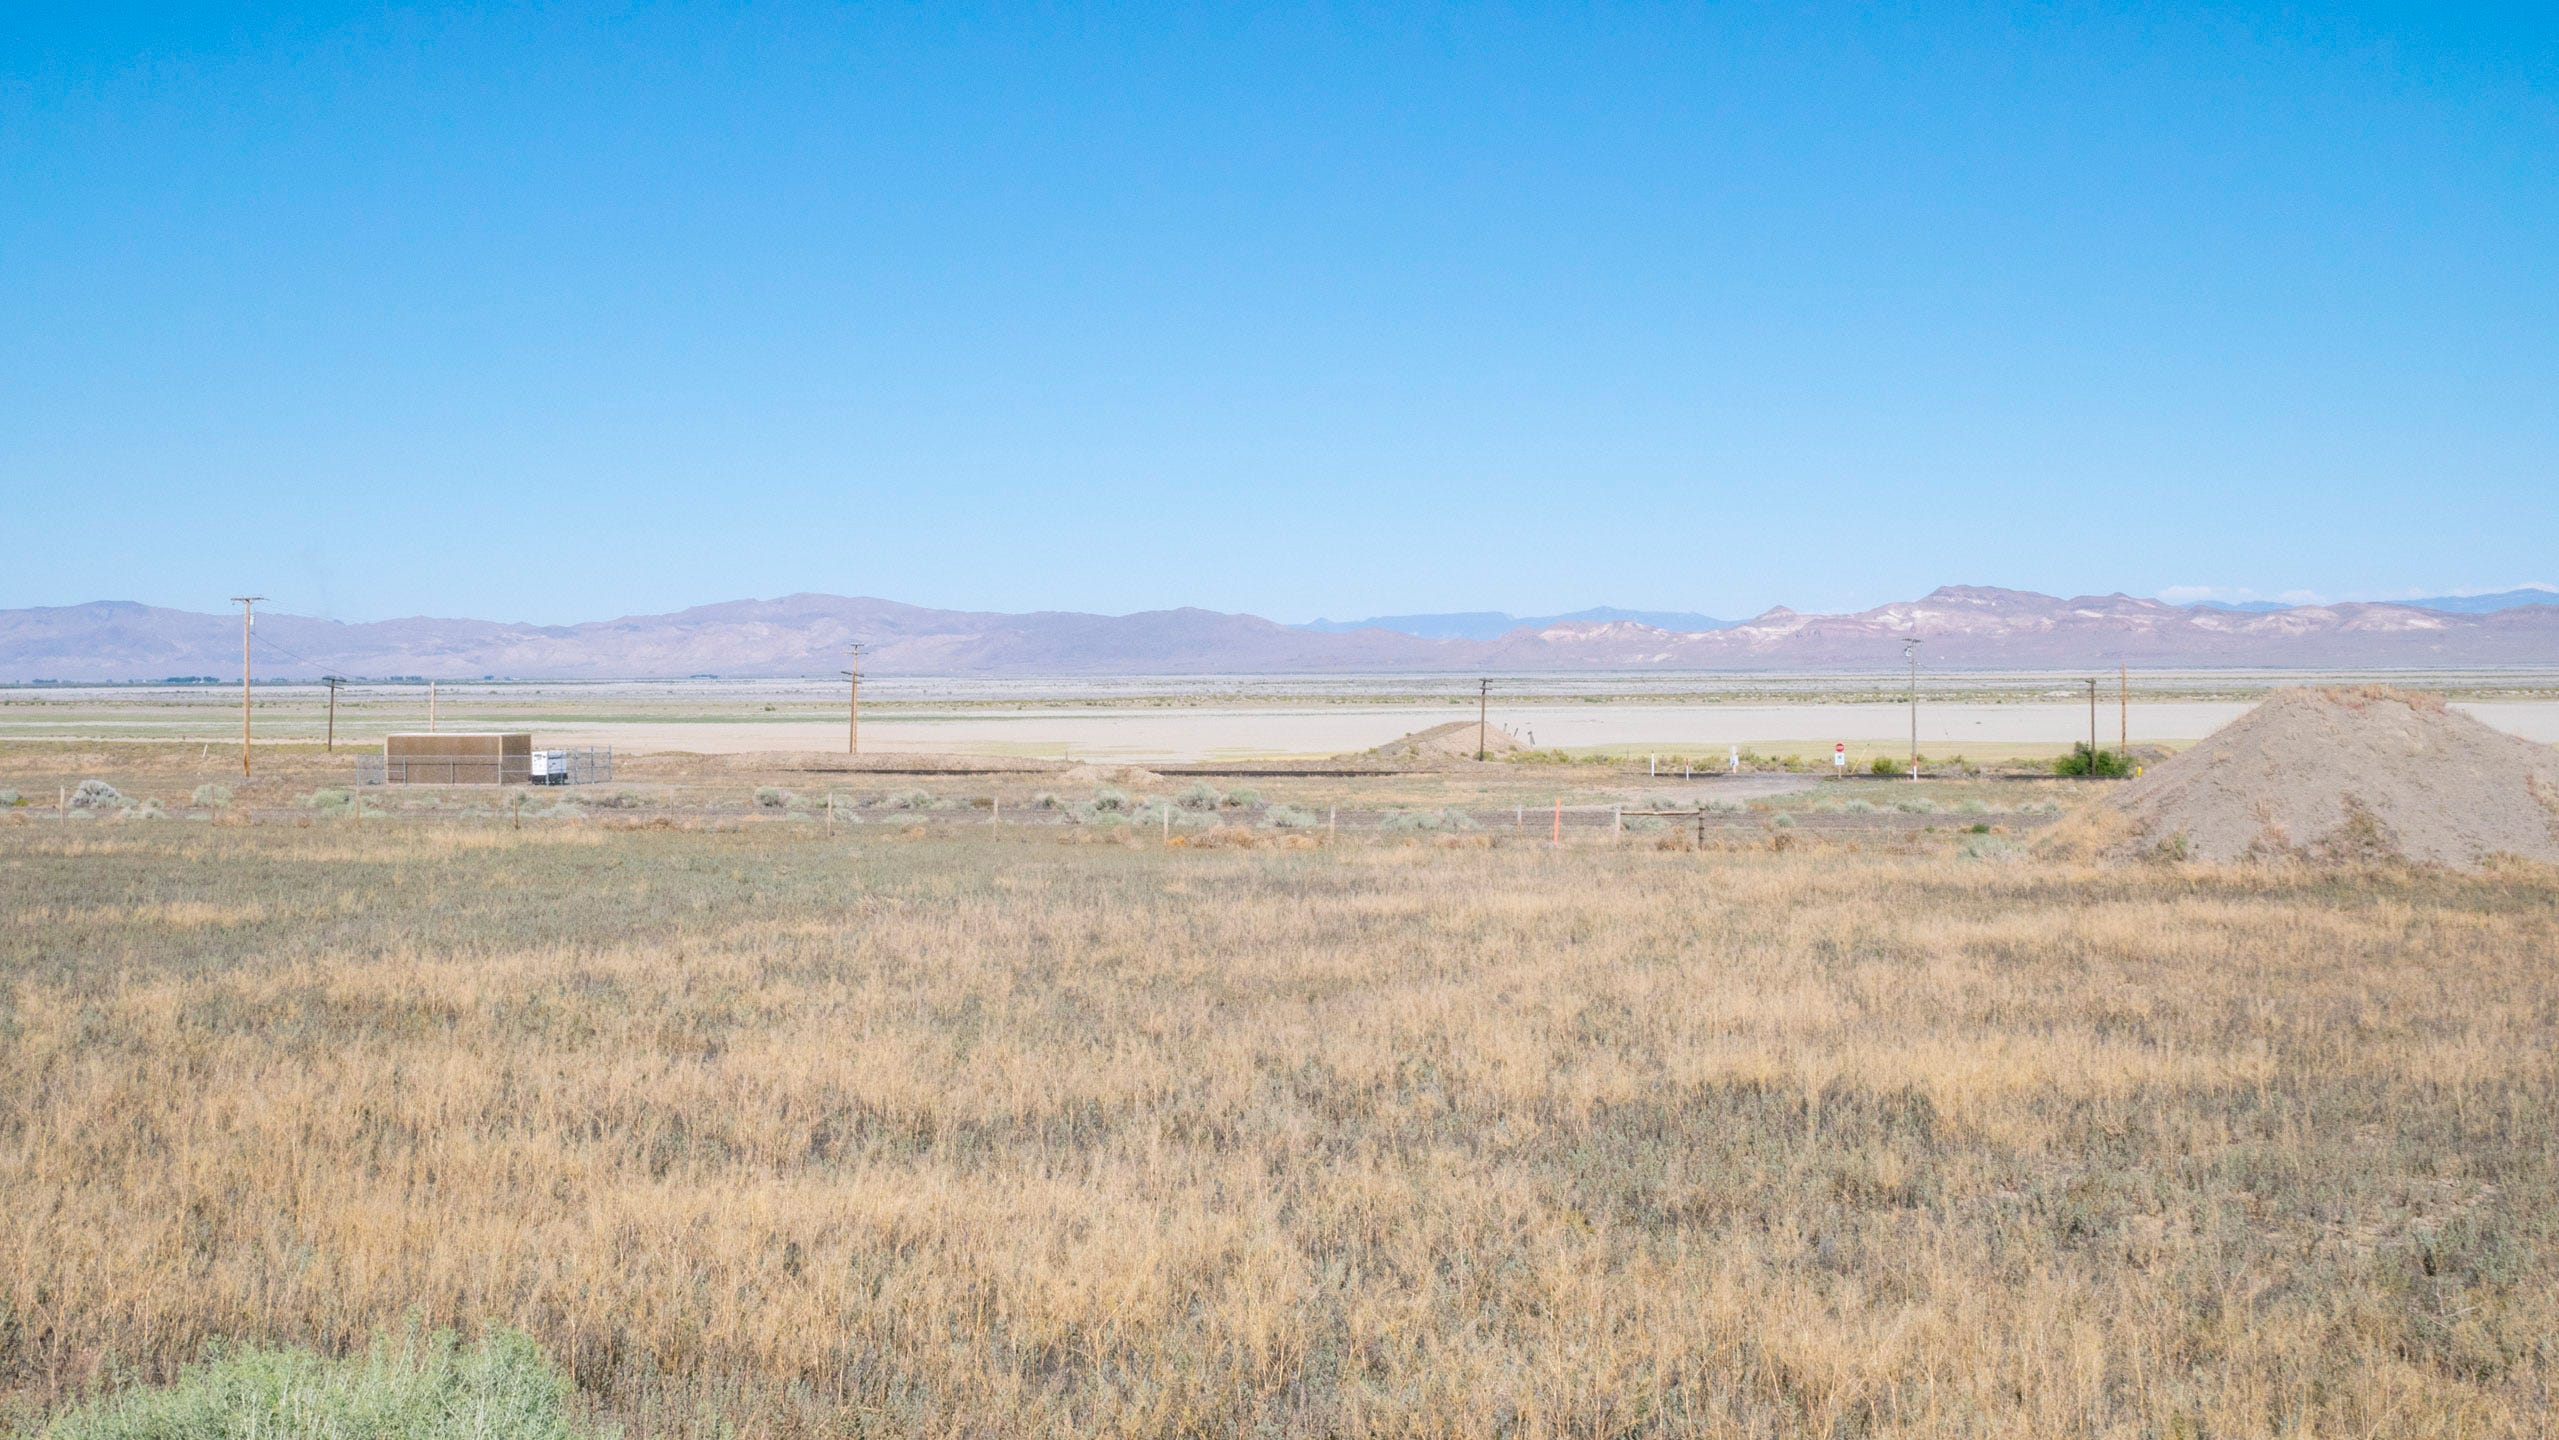 Photograph of the Nevada desert. In the foreground are short, dry grasses. Beyond that, the rails of the railroad can be seen, with telephone poles running alongside and a short, squat utilitarian building (akin to a shipping container) nearby. Beyond, the white sands of the desert. And beyond that in the hazy distance, rugged, barren mountains.